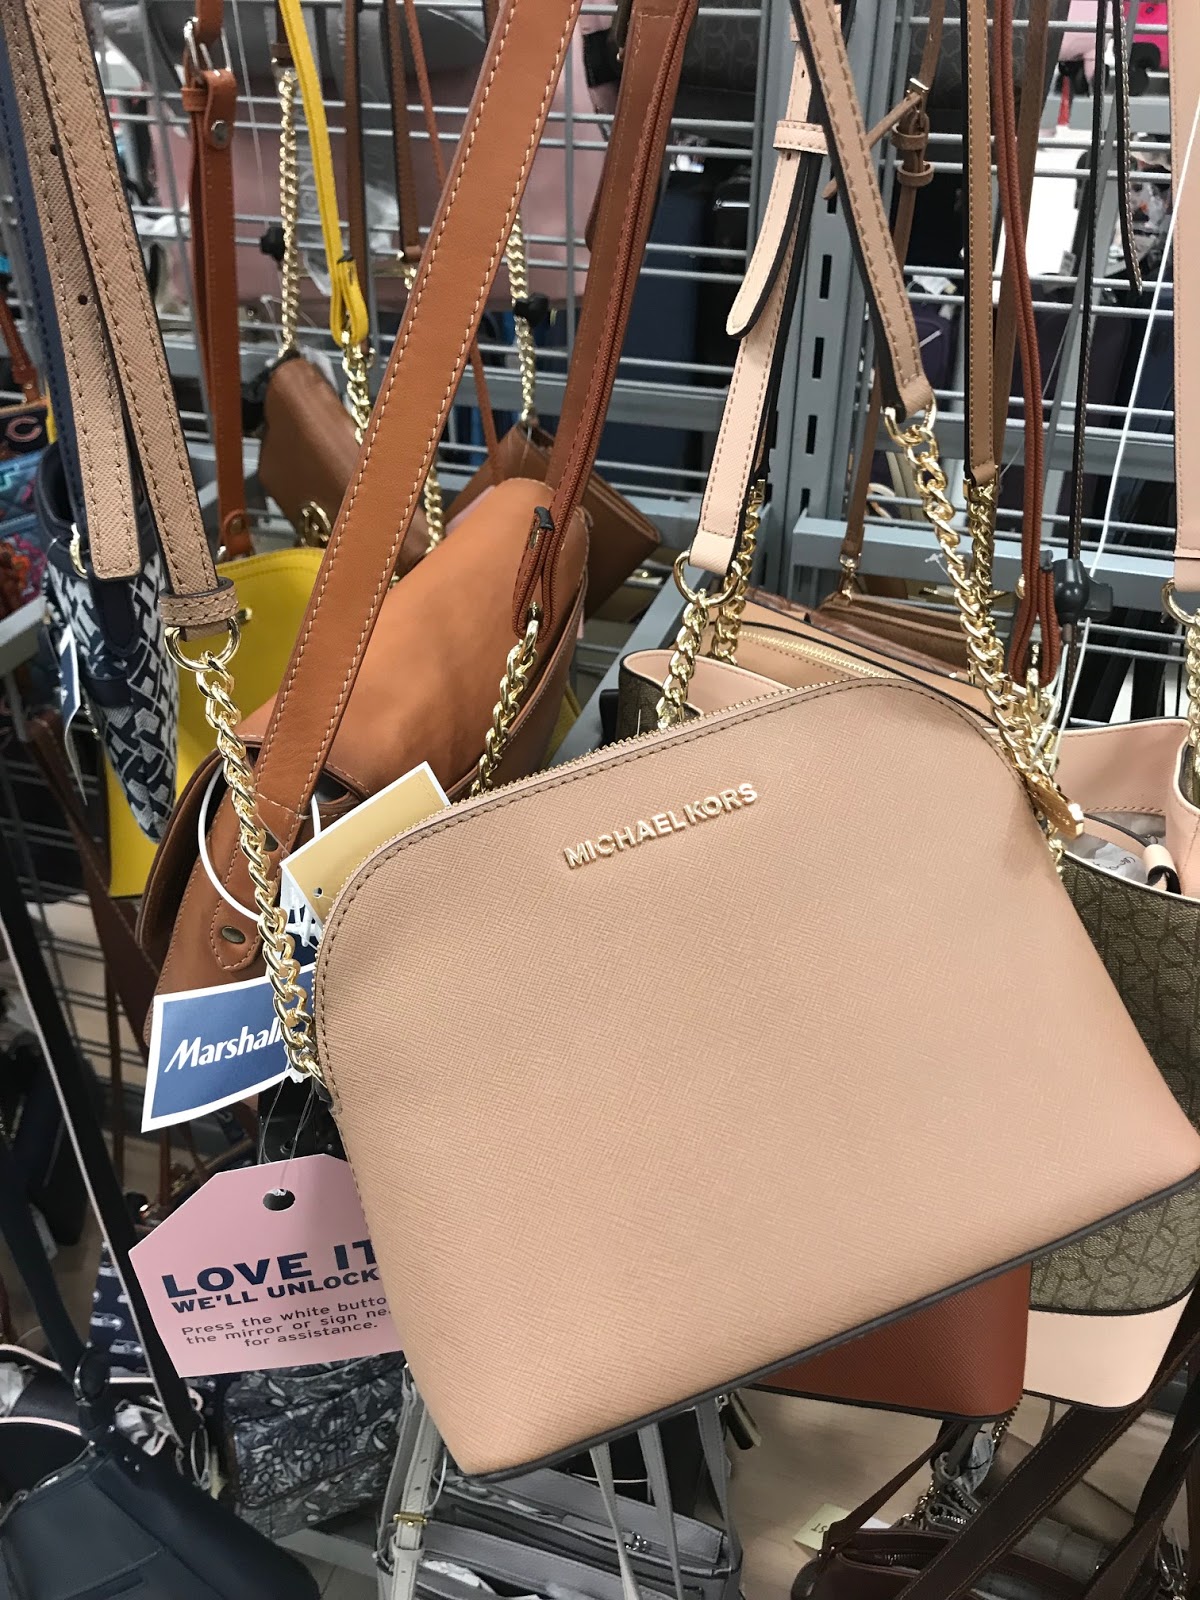 mk bags in marshalls